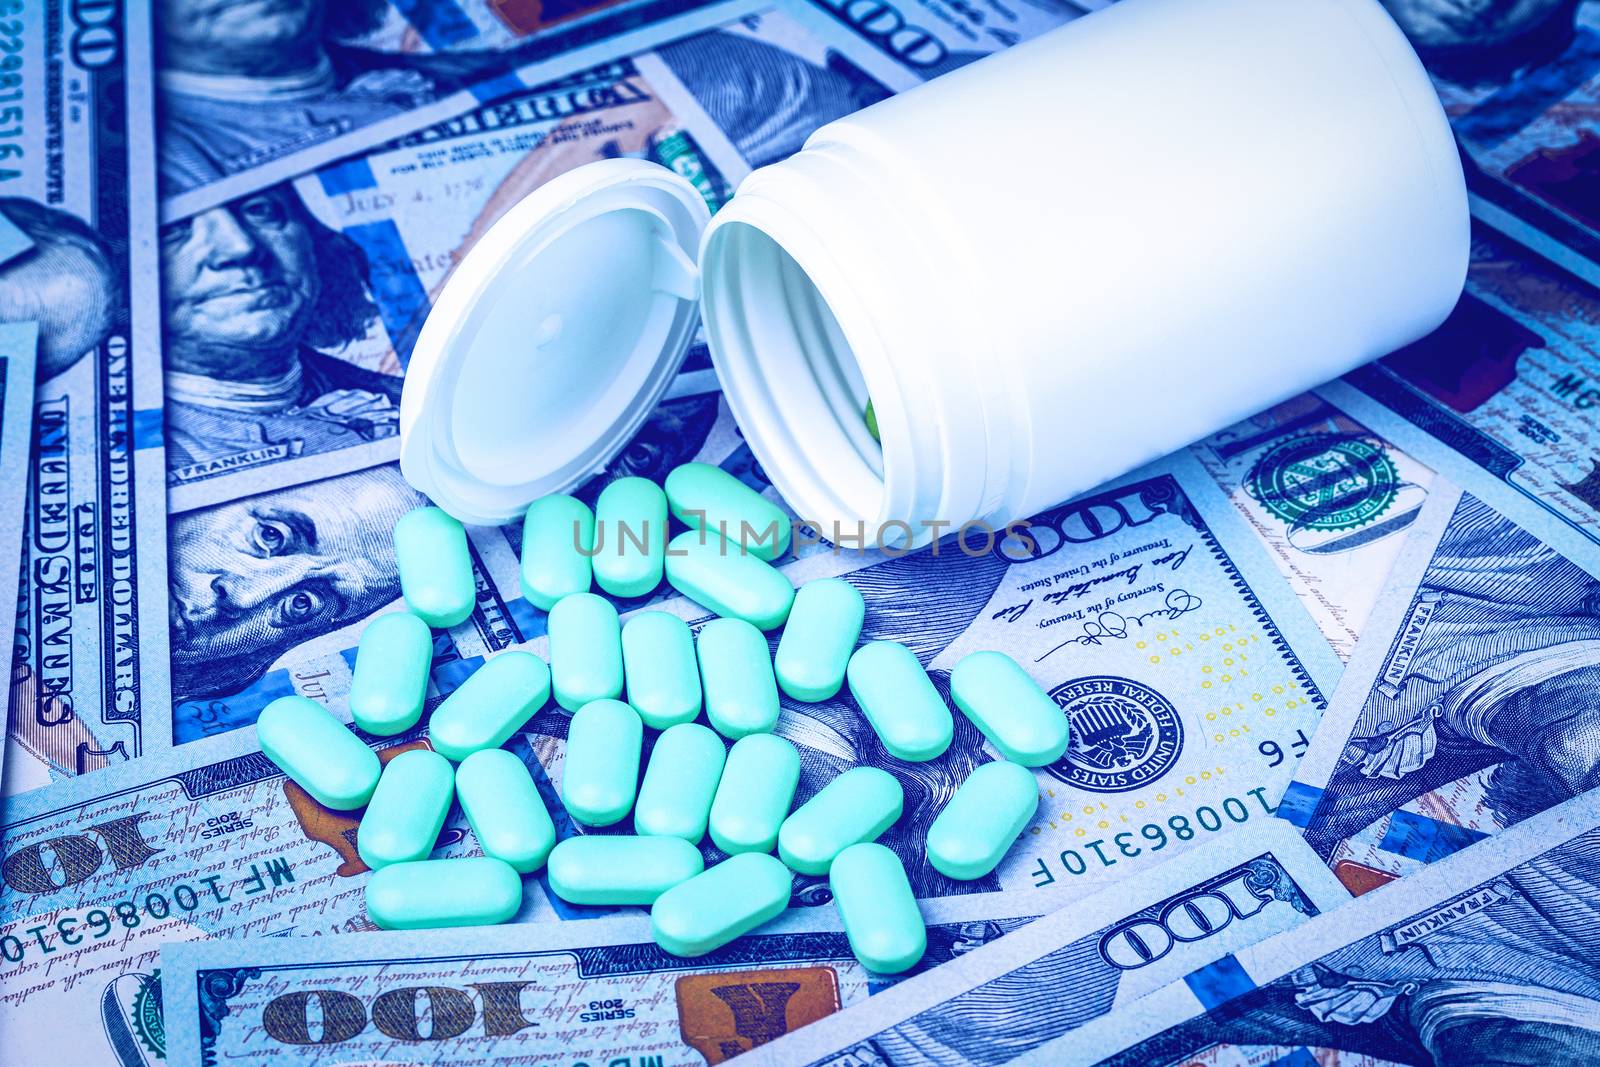 Green pills on the background of one hundred dollar bills. The concept of the expensive cost of healthcare or financing medicine. White medicine bottle with copy space for text.